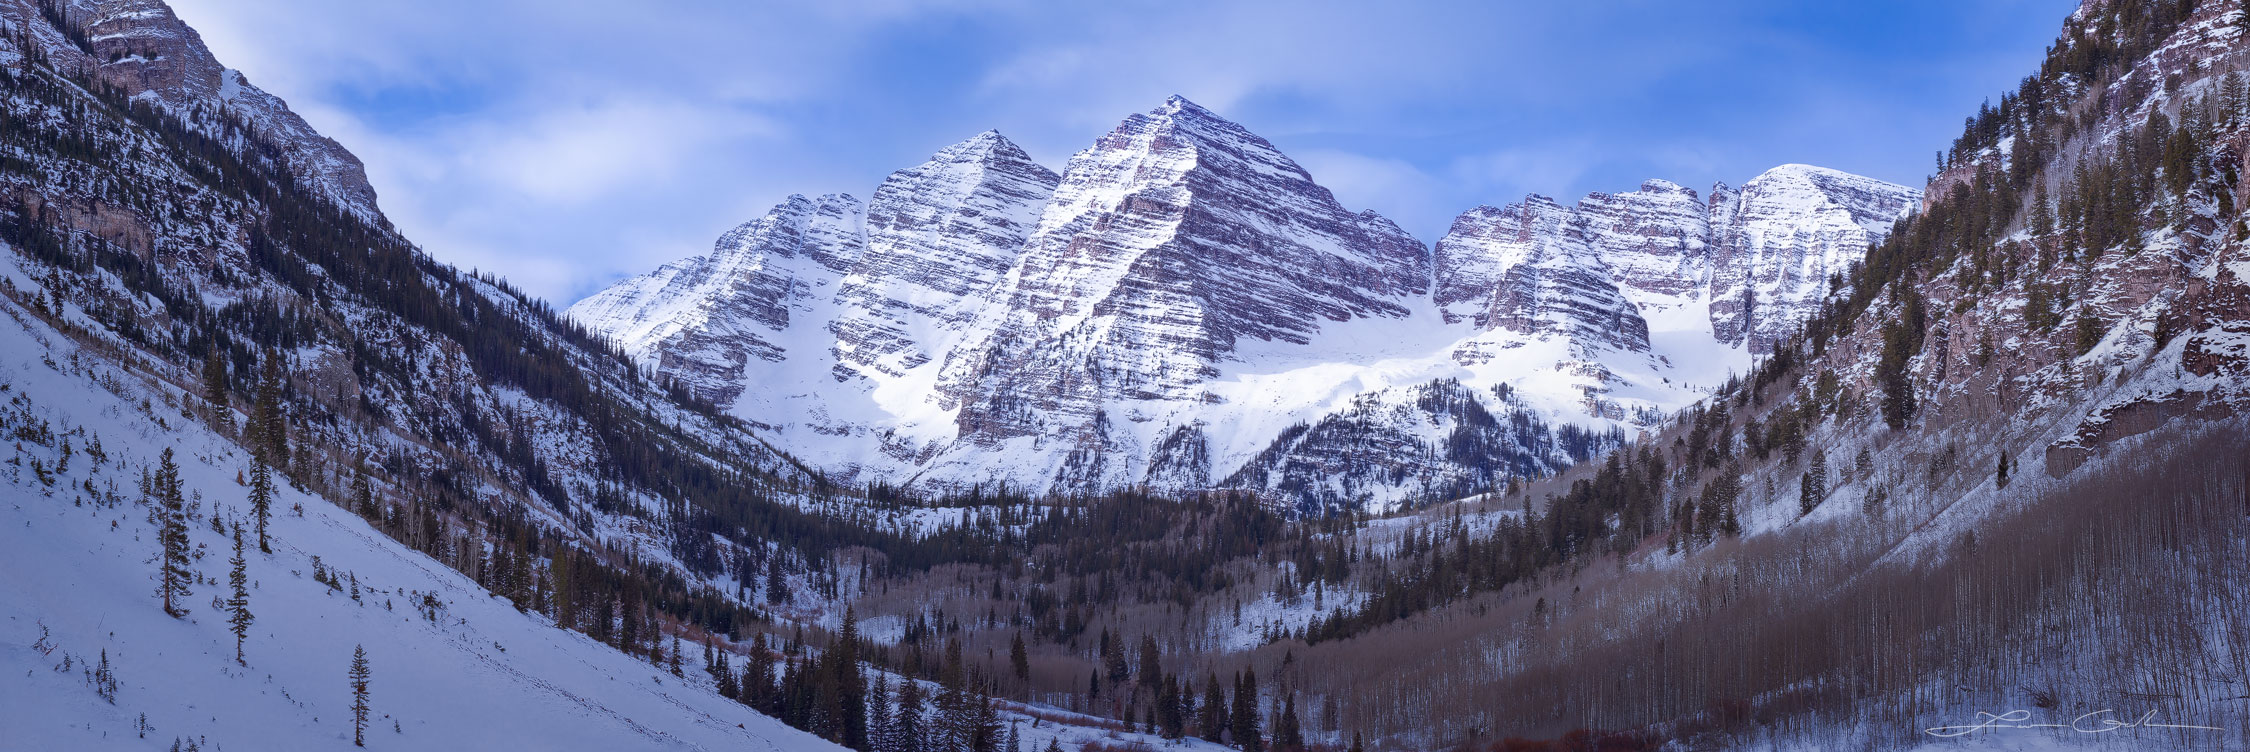 A winter panorama of Maroon Bells, Colorado with snow covered mountains and aspen and evergreen trees